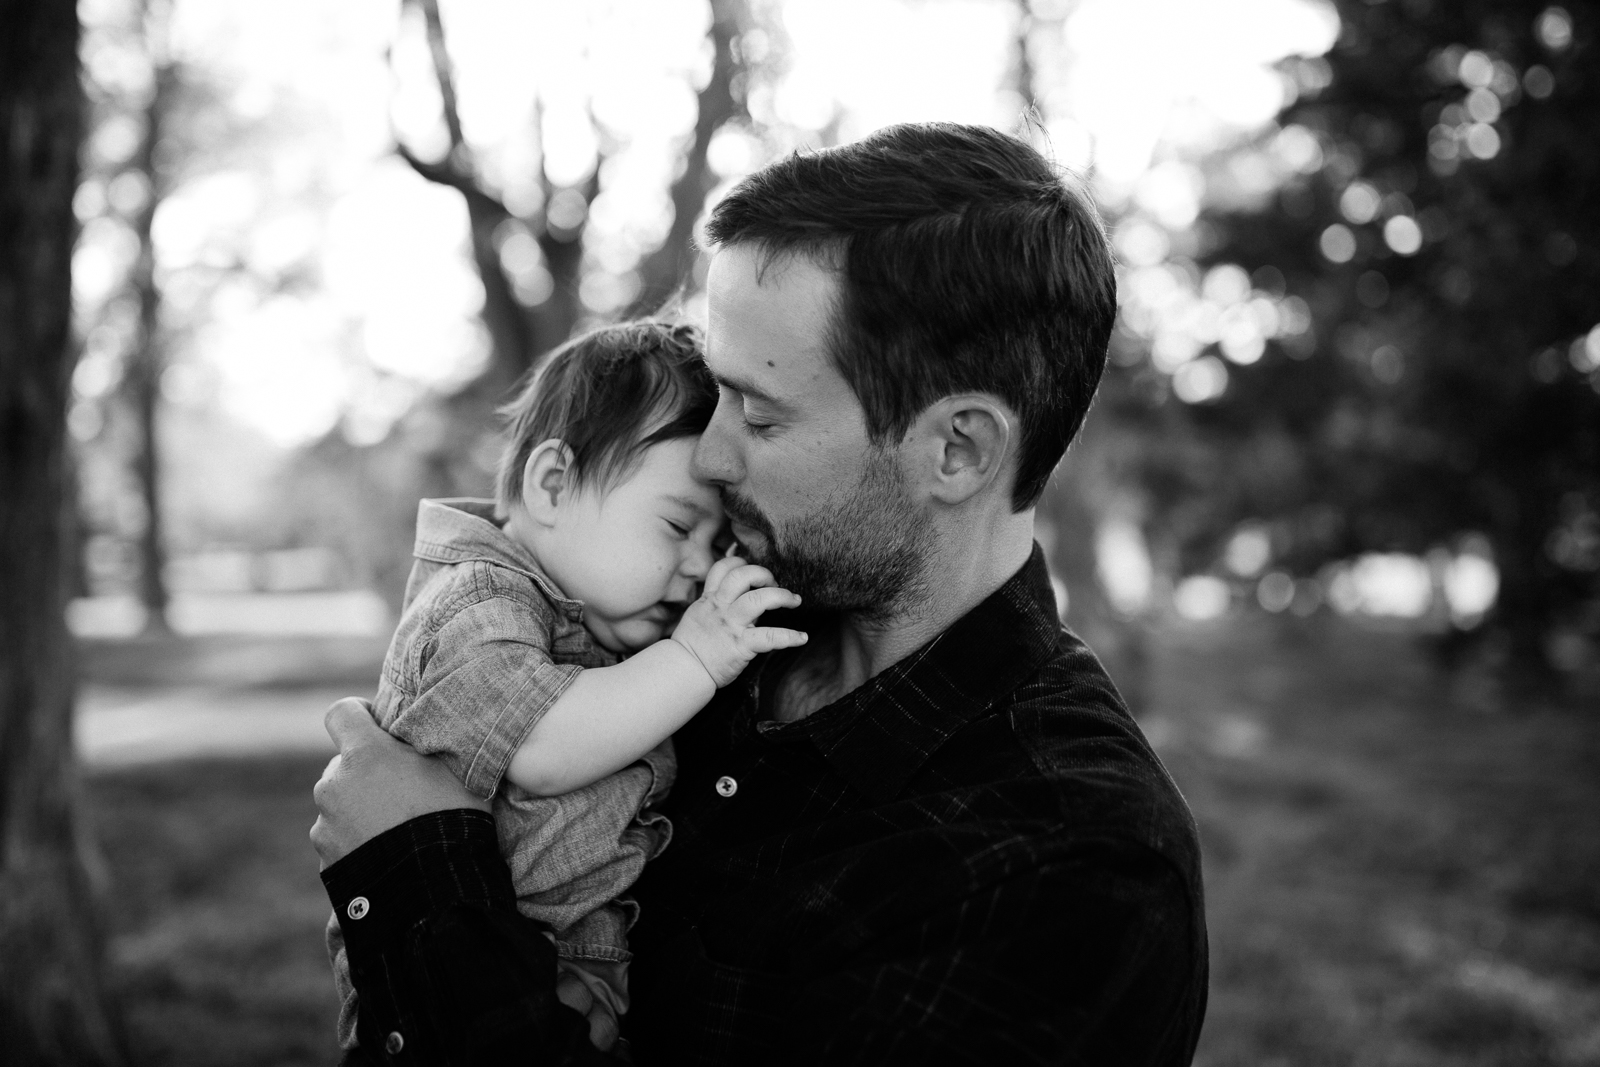  Black and white portrait of father cuddling his son, emotive portrait of father and son, Kansas City family photographer, Rebecca Clair Photography 